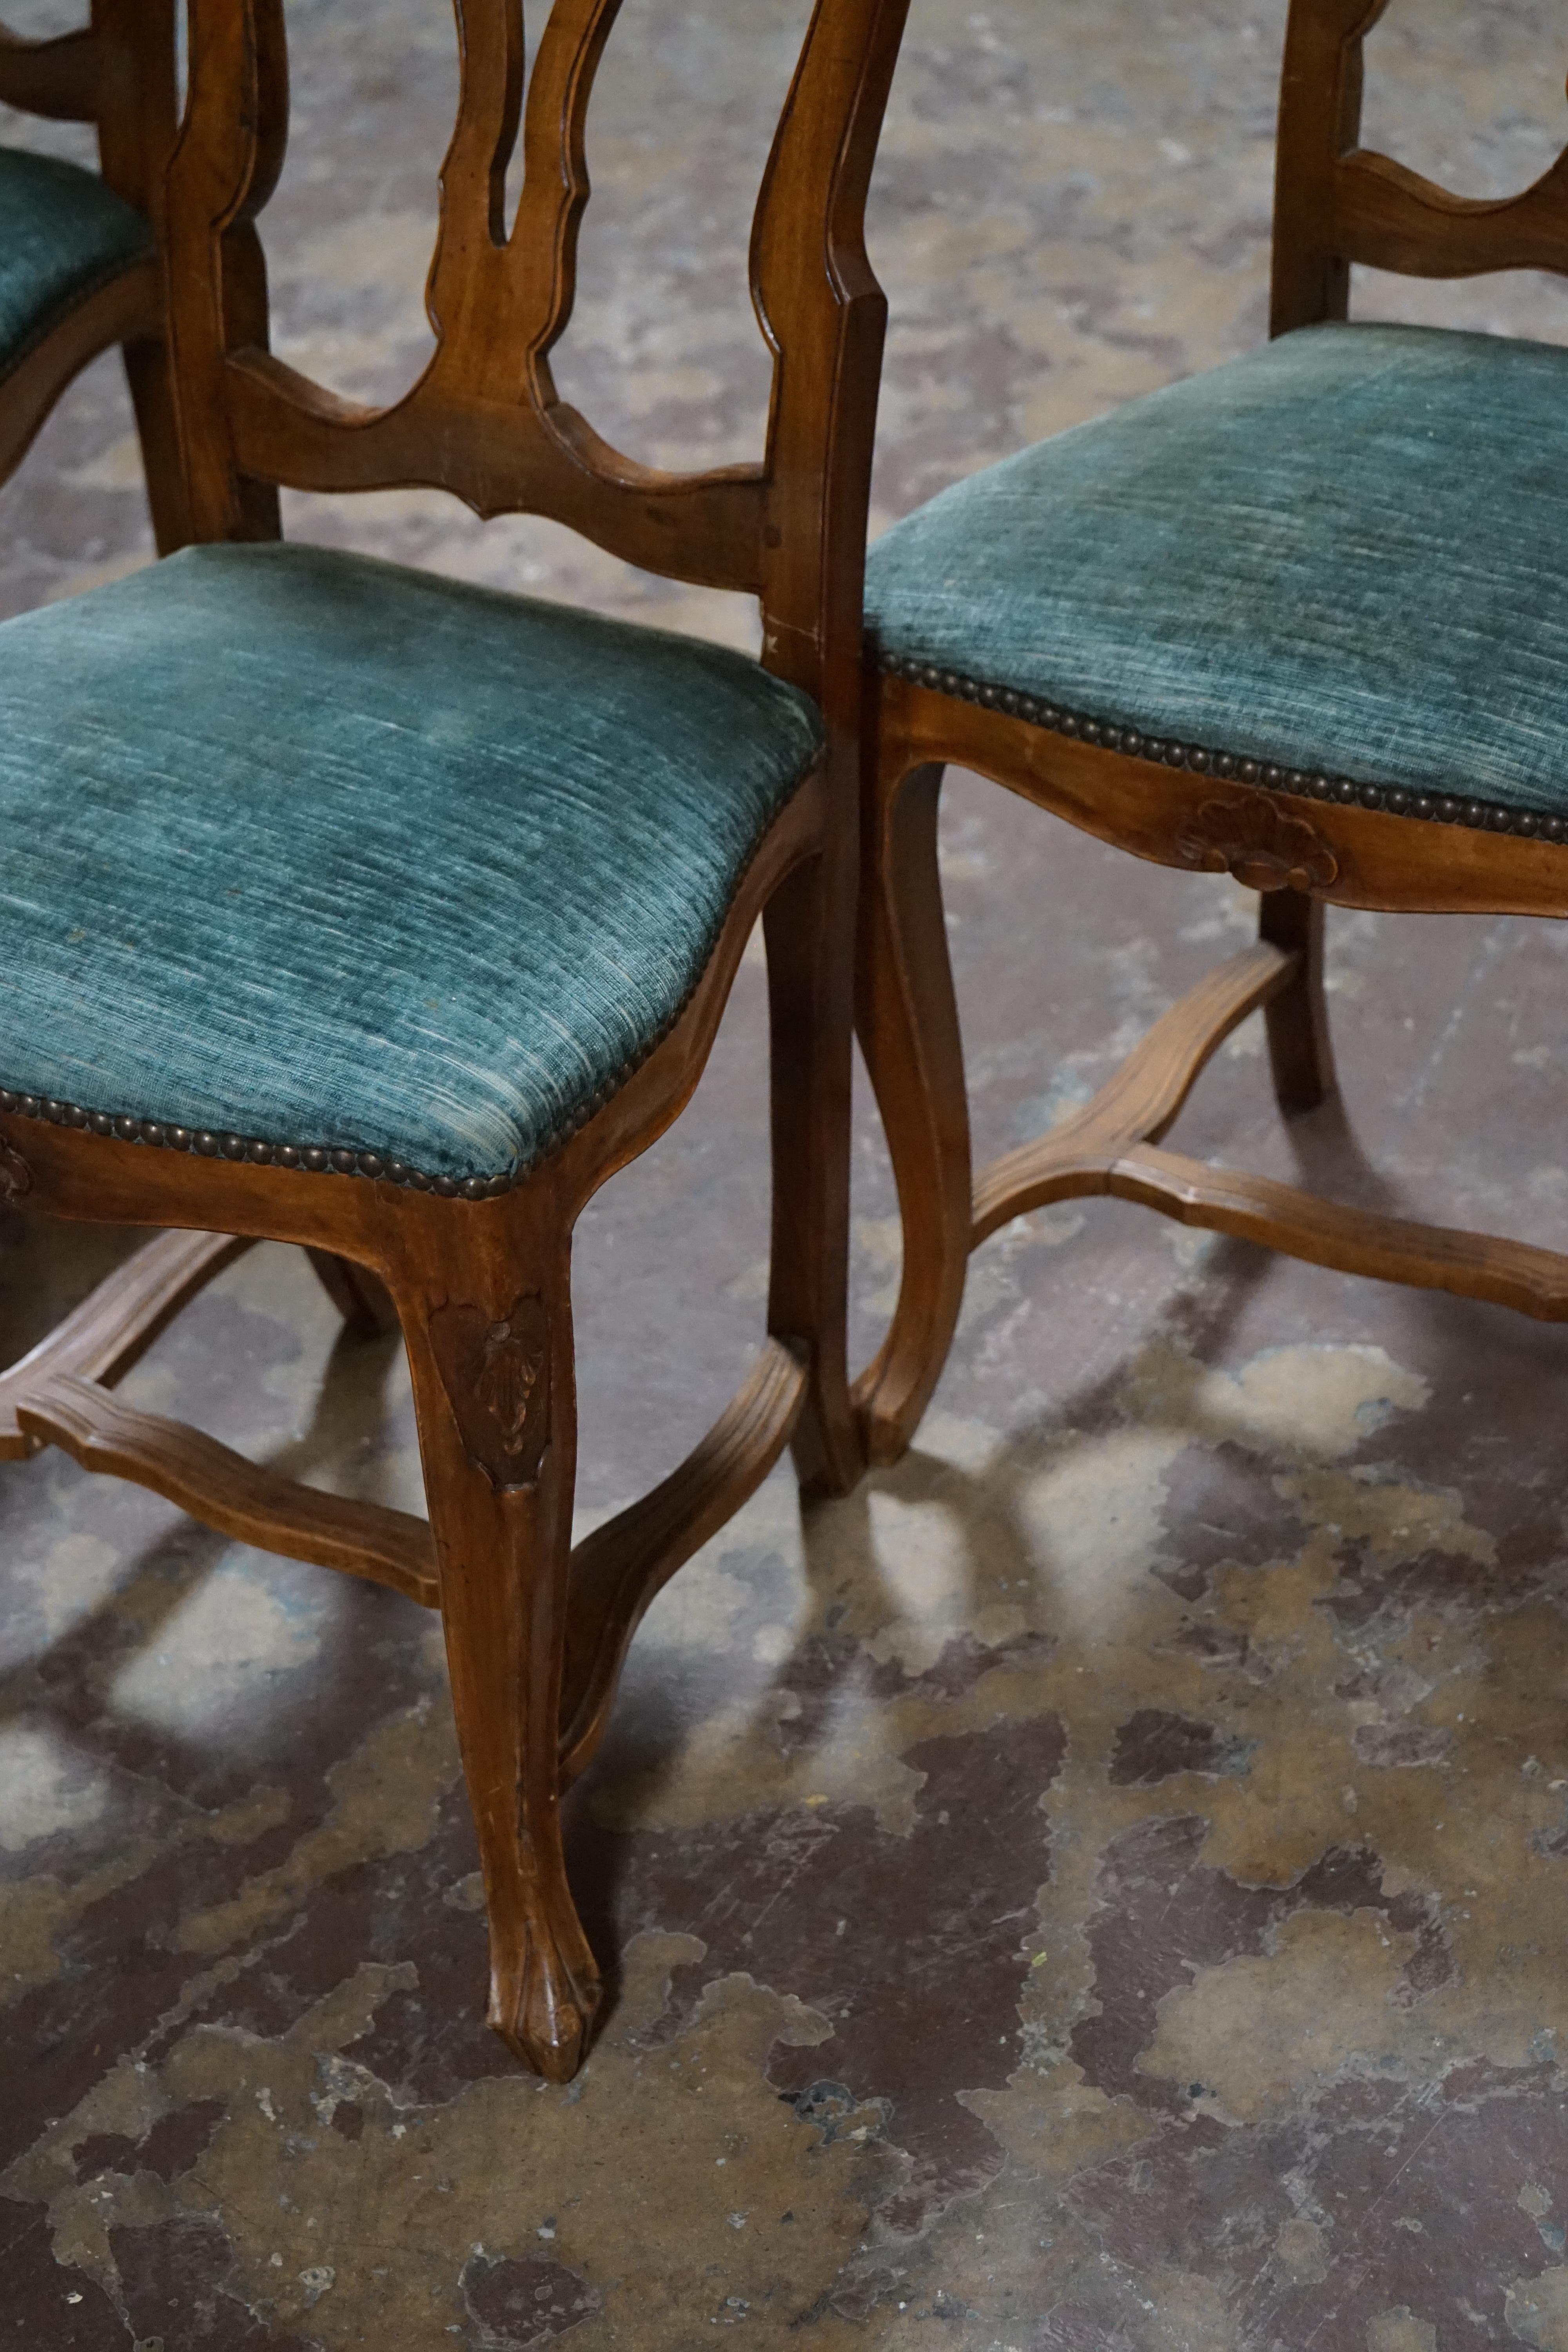 Set of four French side chairs featuring cabriole legs, bended back with cutout pattern.

Measurements: Overal 40.5'' H / Seat height 19'' / Width 18'' / Depth 16''.